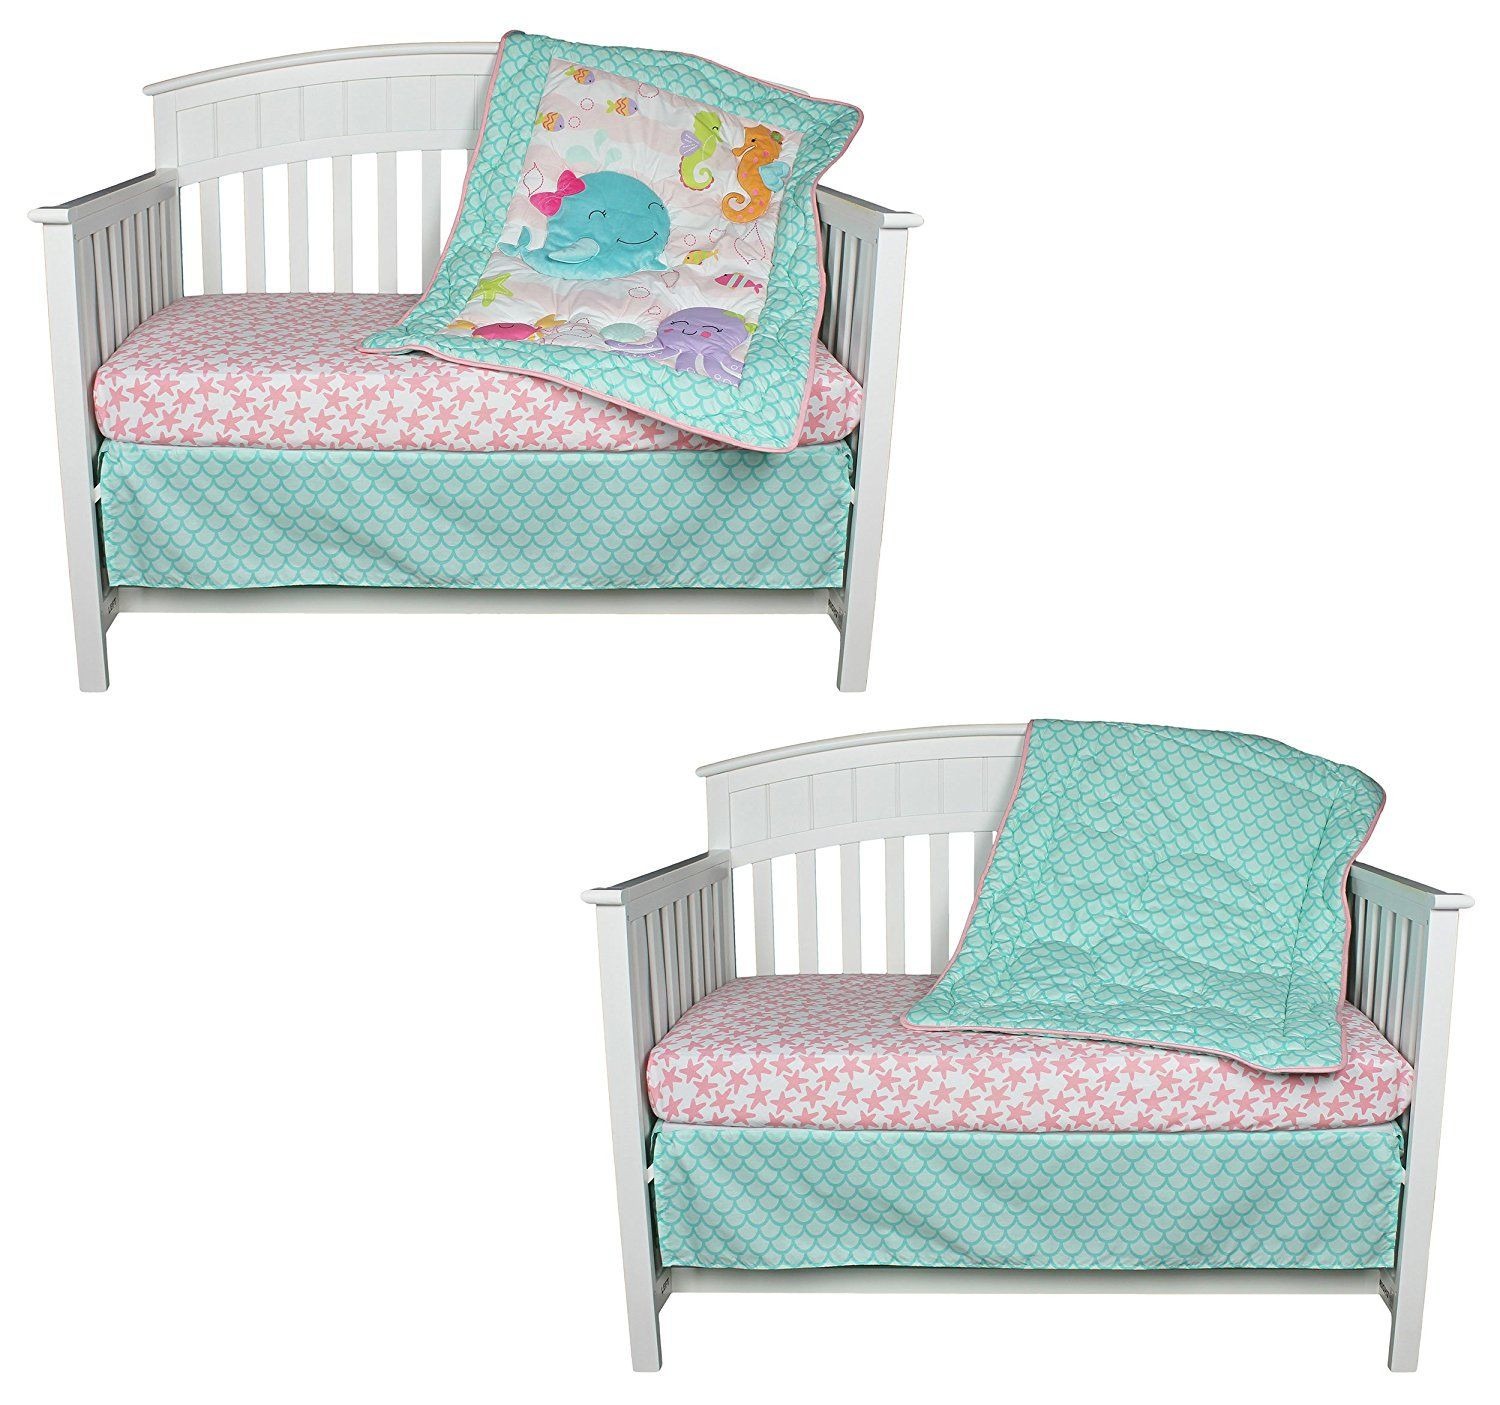 Belle Baby Bedding And Decor
 Sea Sweeties 3 Piece Baby Crib Bedding Set by Belle With